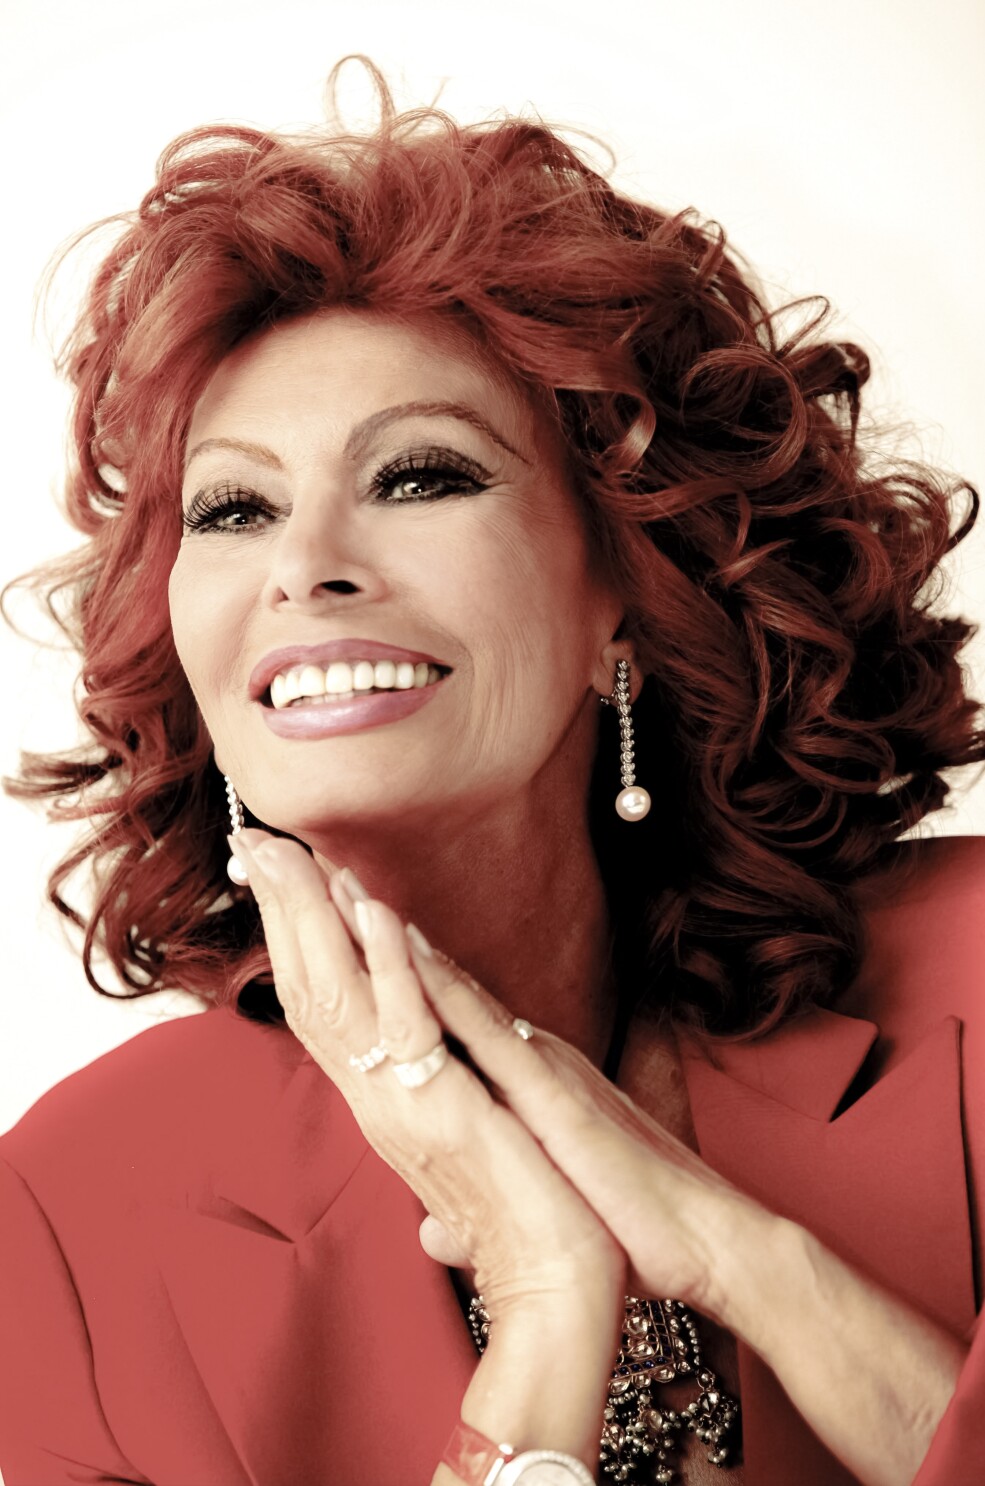 At 85 Sophia Loren Still Works Hard Loves Acting And Makes No Apologies For Her Nose The San Diego Union Tribune